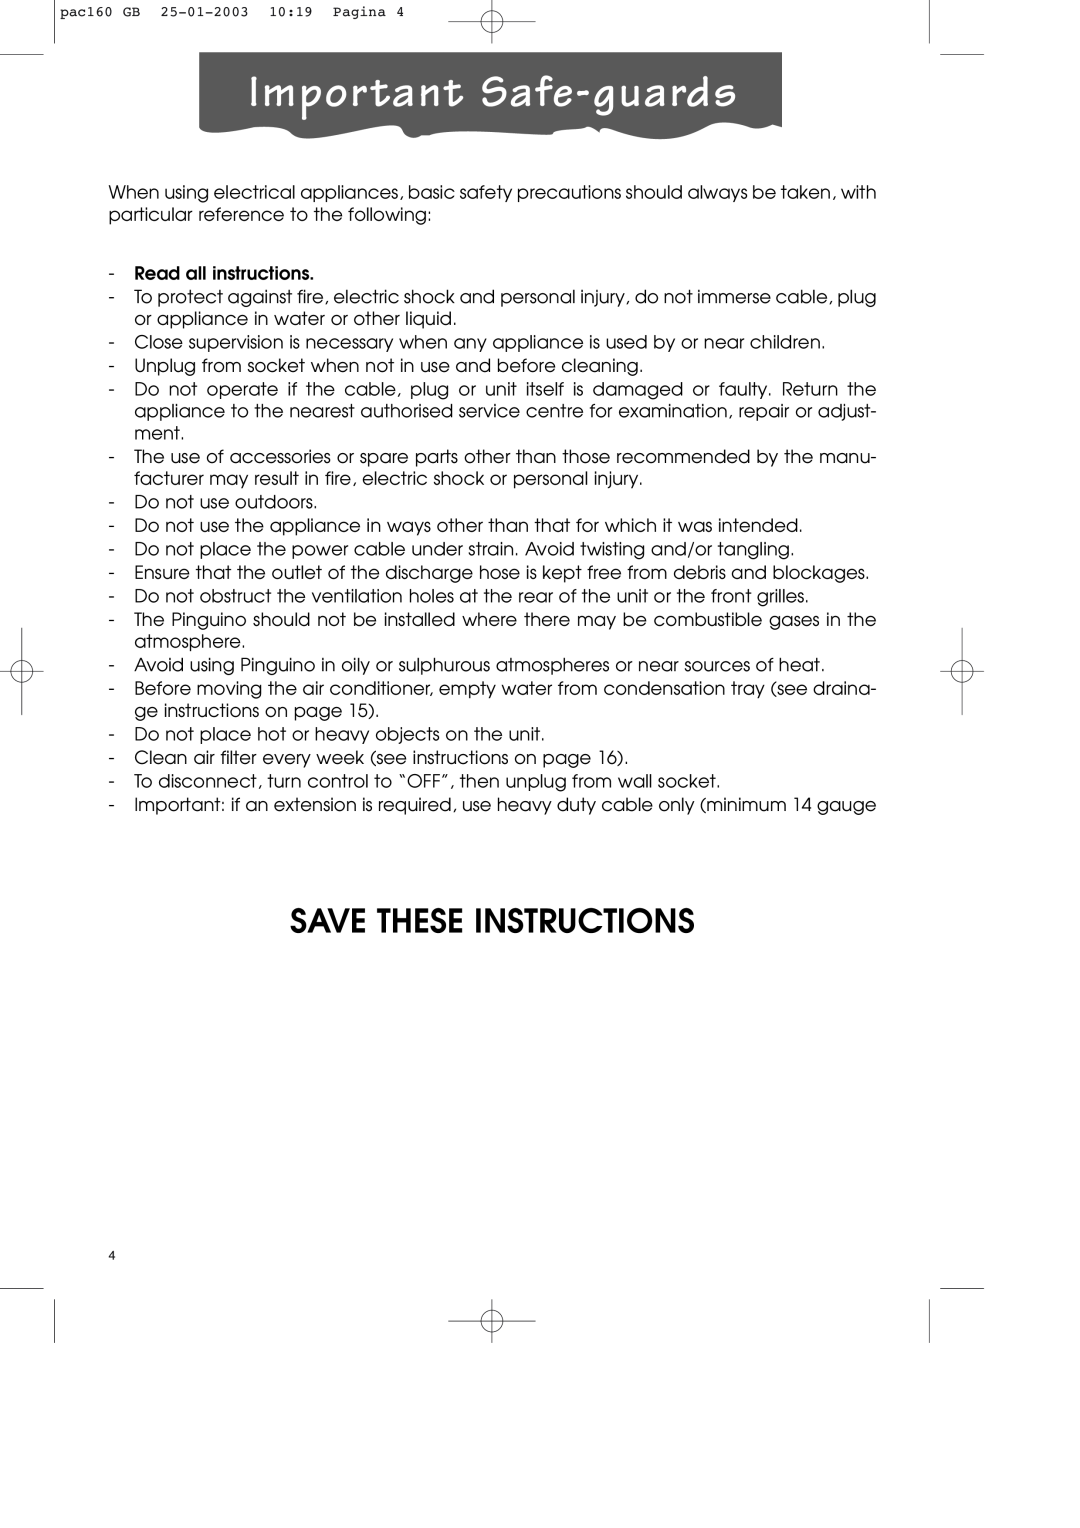 DeLonghi PAC160 manual Important Safe-guards, Save These Instructions 